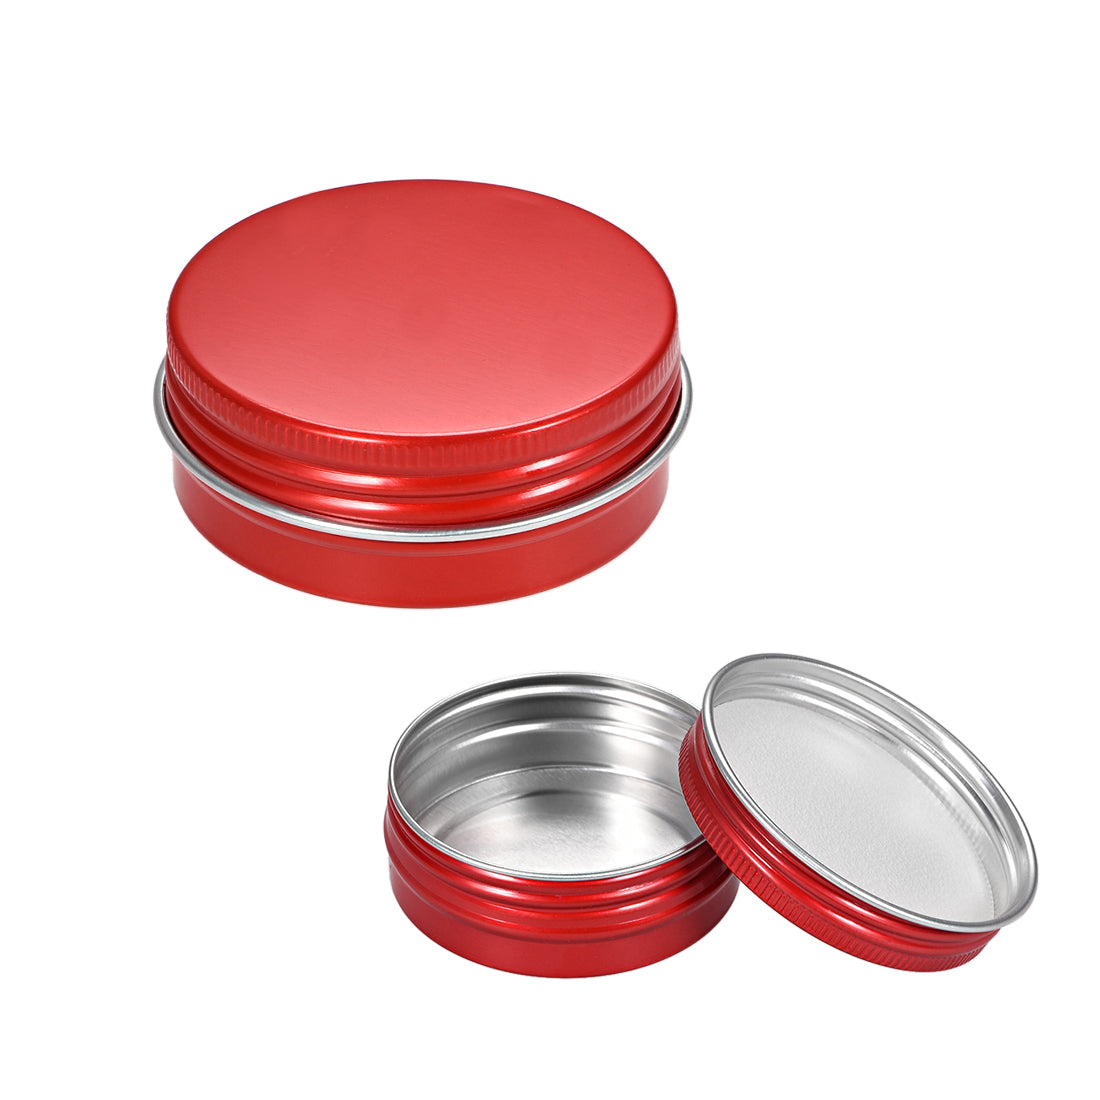 uxcell Uxcell 1 oz Round Aluminum Cans Tin Can Screw Top Metal Lid Containers Red 30ml 6pcs